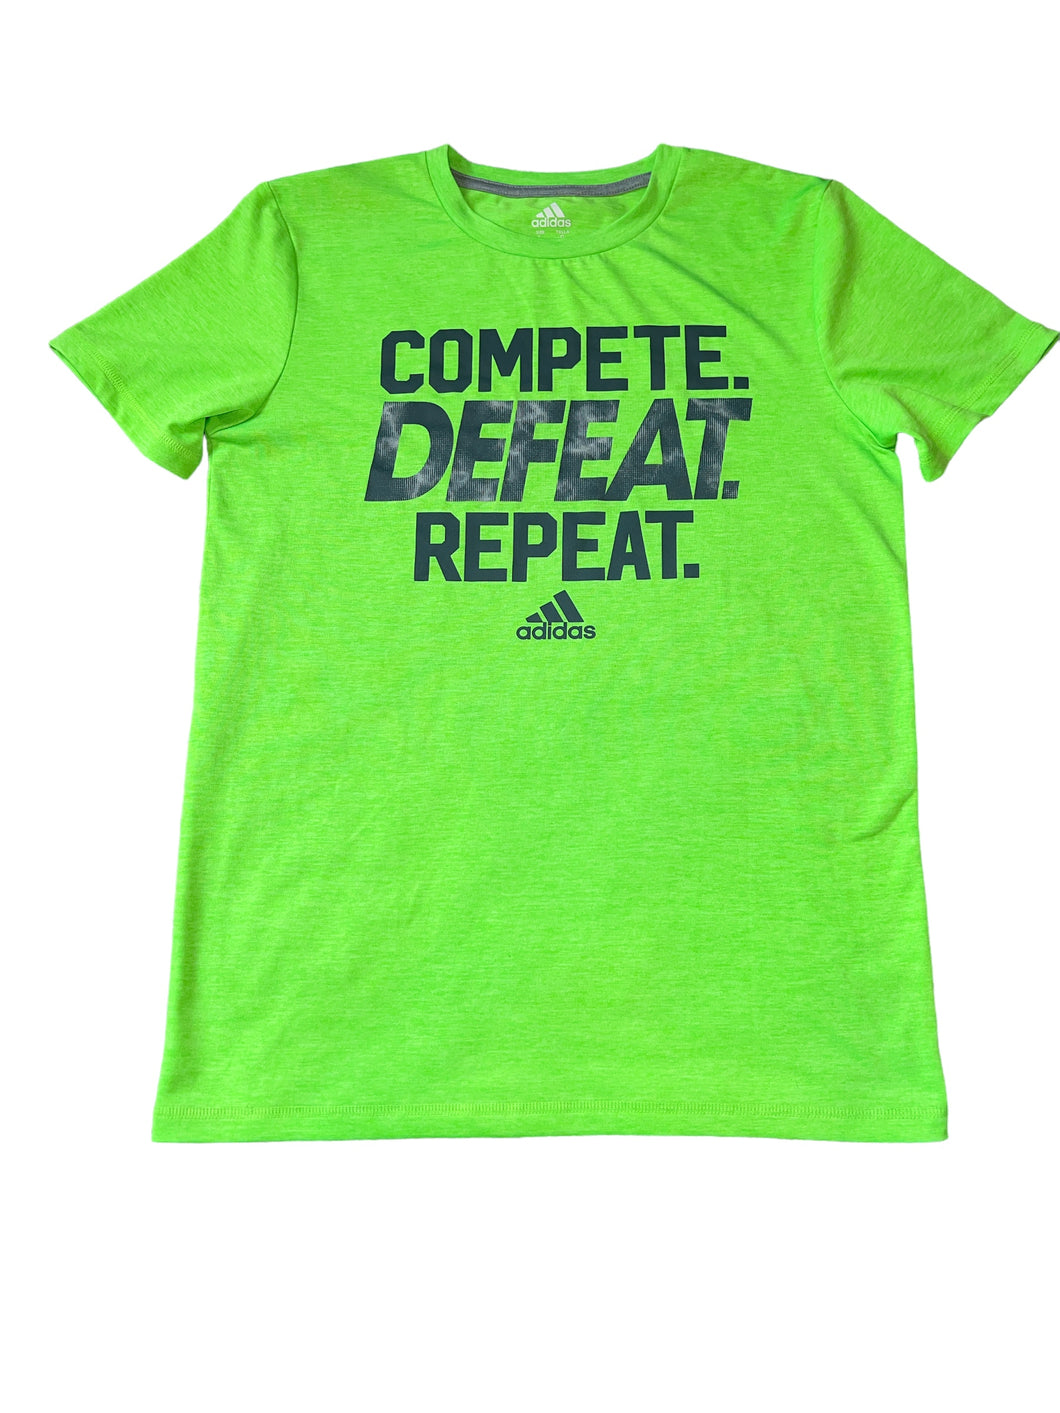 Adidas boys Complete Defeat Repeat activewear tee L(14-16)